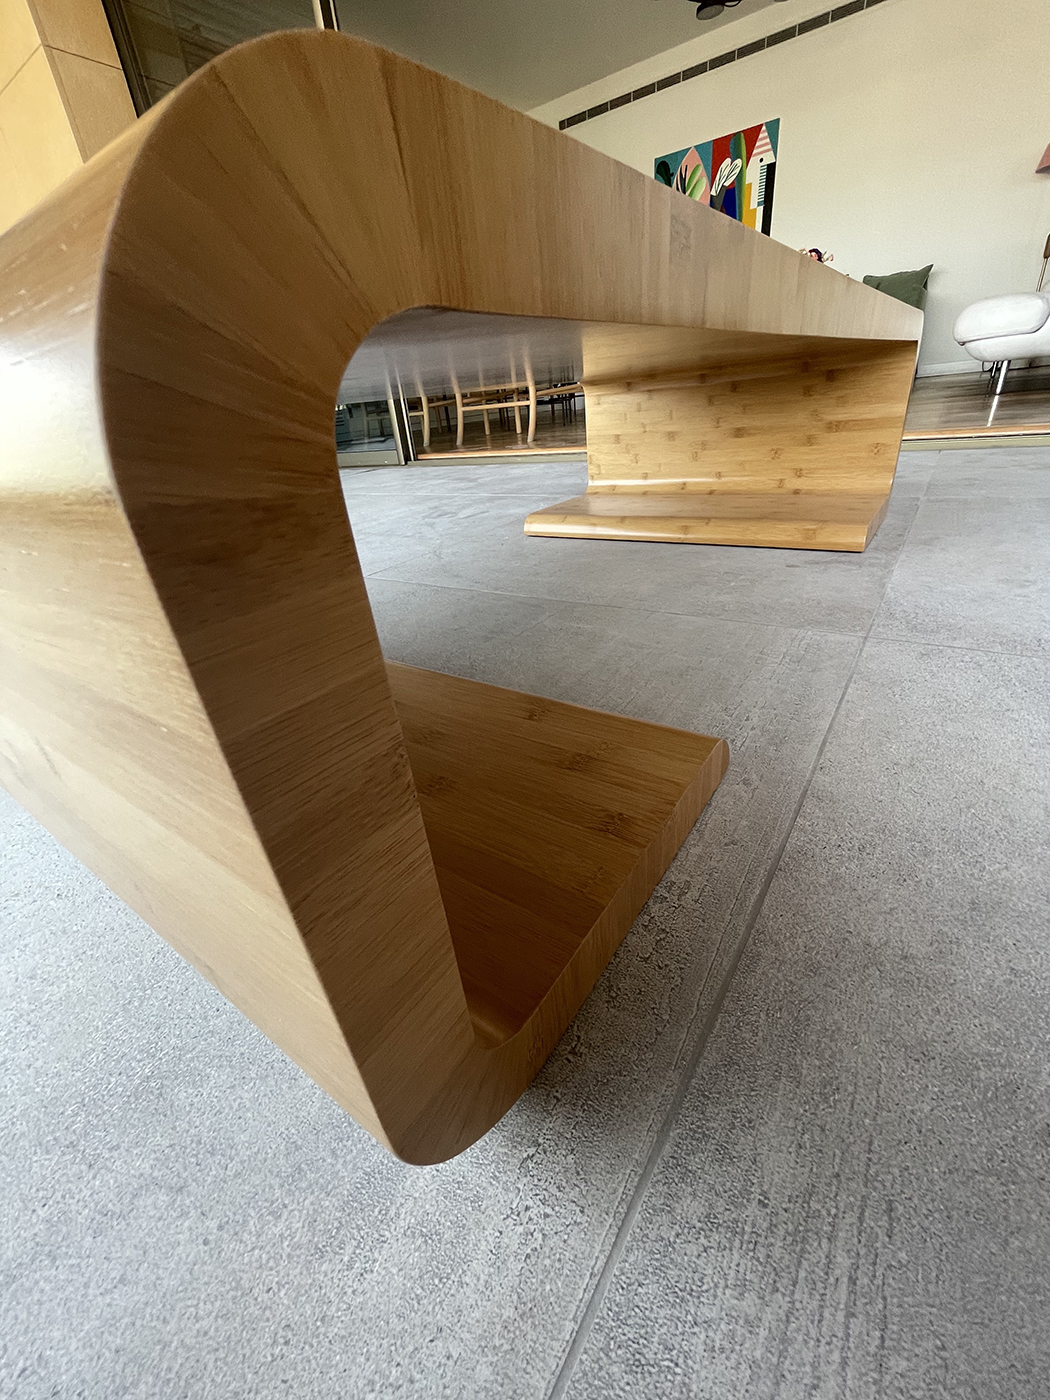 MDDM-Architects-Low-Table-furniture-product-design-bamboo-wood-studio